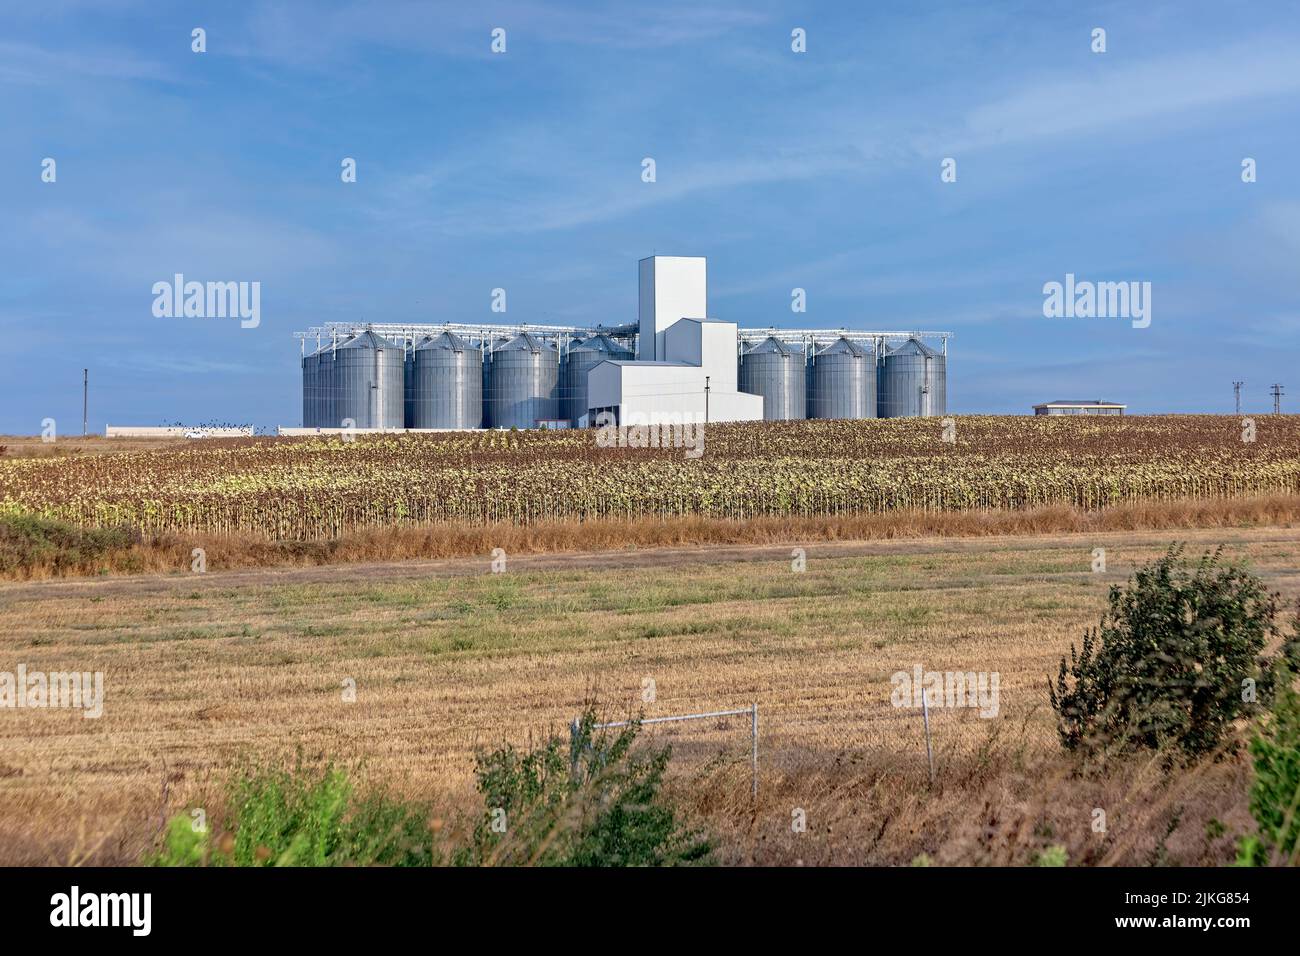 Raw material storage tanks, silo for sunflower seed oil production plant and the sunflower farm in the foreground. Sunny, partially cloudy sky. Stock Photo